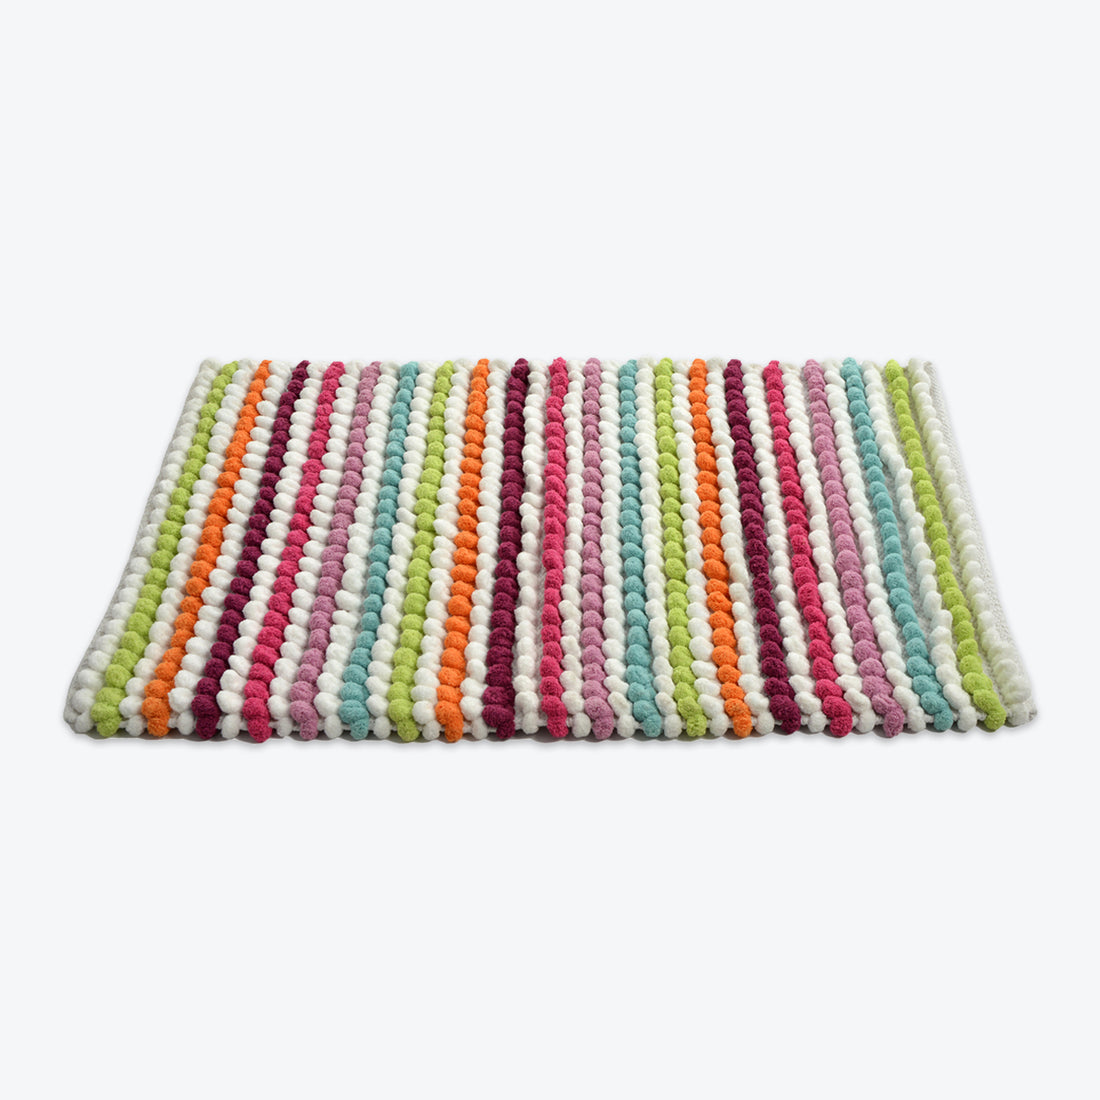 Multibright rainbow colourful chunky bobble bath mat - luxury multicolour bathroom rug super thick and absorbent